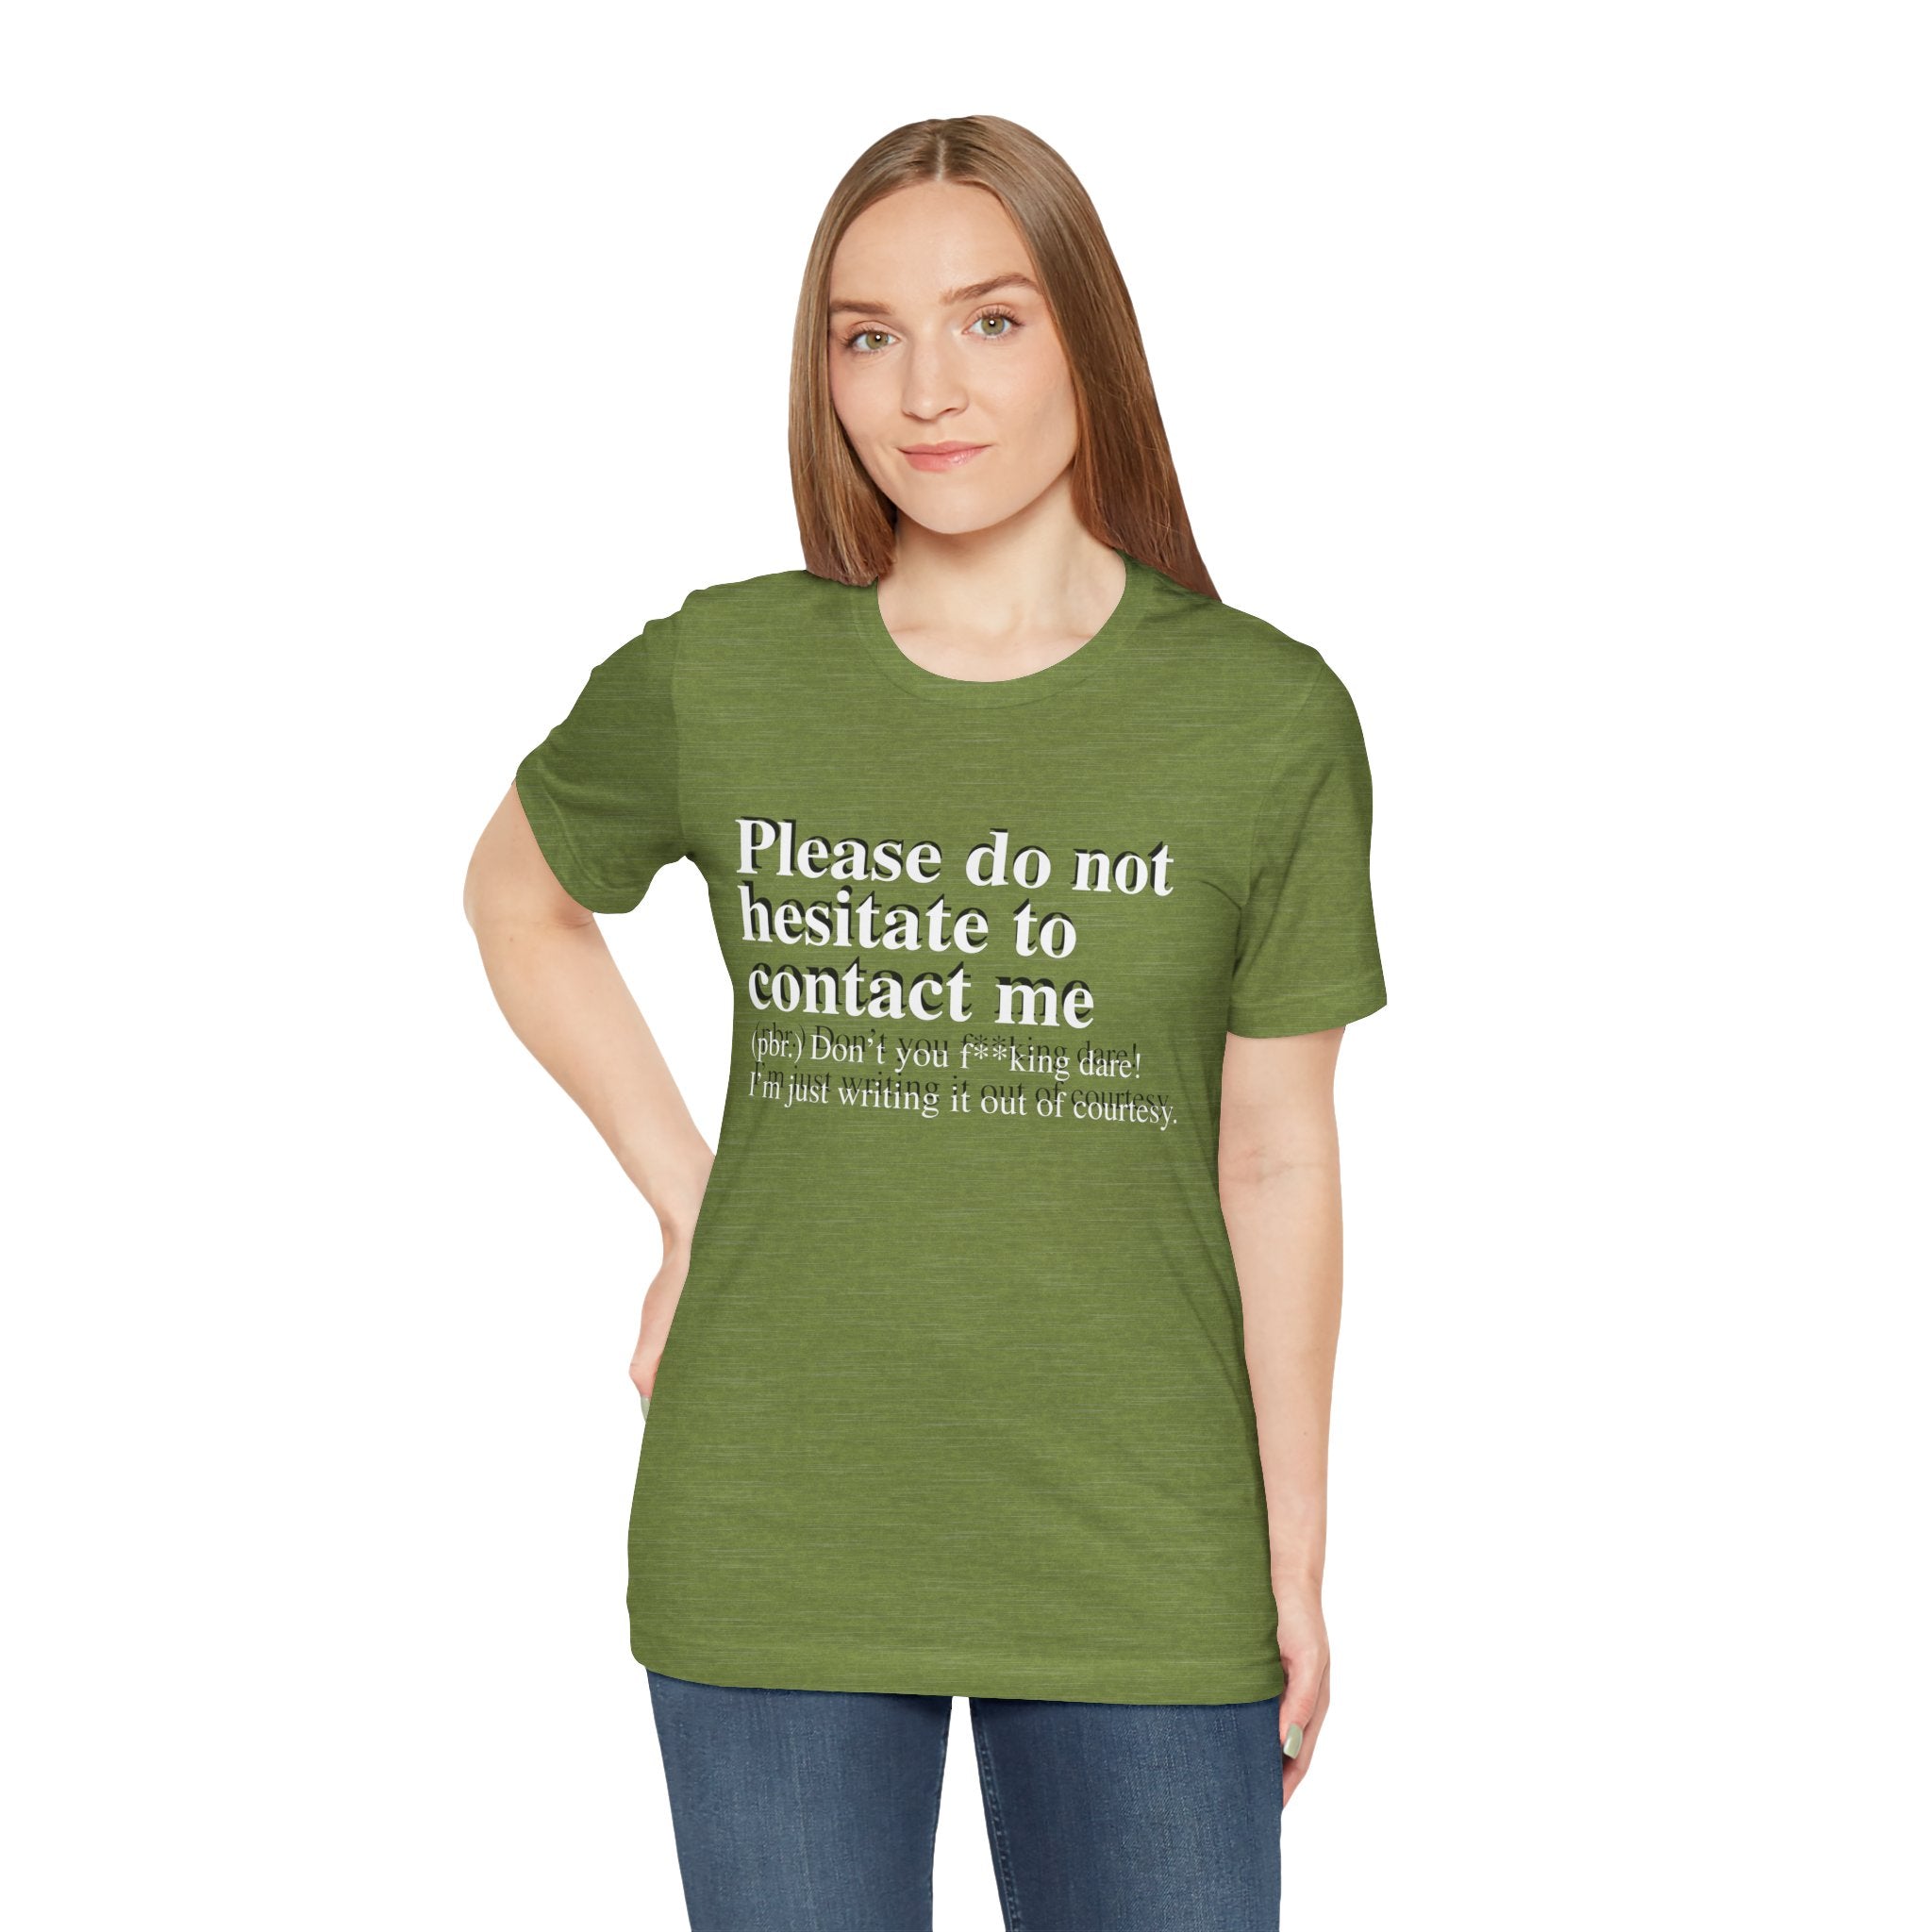 Woman in green Please Do Not Hesitate to Contact Me T-Shirt with text "please do not hesitate to contact me (this isn't you 'making me'! I'm just writing it out of courtesy)" standing against a white